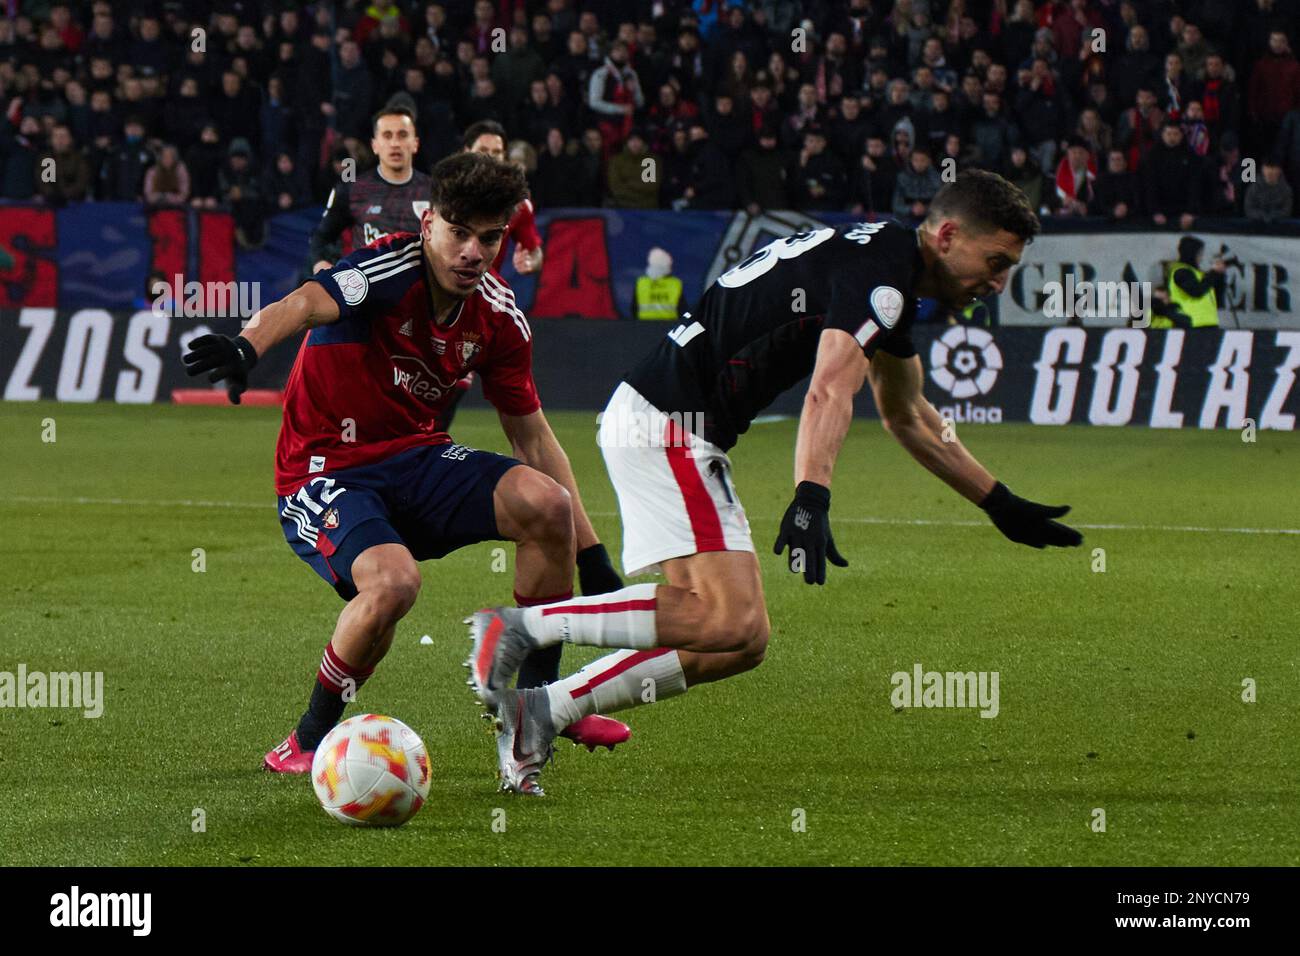 Pamplona, Spain. 1st Mar. 2023. Sports. Football/Soccer. Abde (12. CA Osasuna) and De Marcos (18. Athletic Club) during the first leg football match of the semifinal of the Copa del Rey between CA Osasuna and Athletic Club played at El Sadar stadium in Pamplona (Spain) on March 1, 2023. Credit: Iñigo Alzugaray/Alamy Live News Stock Photo